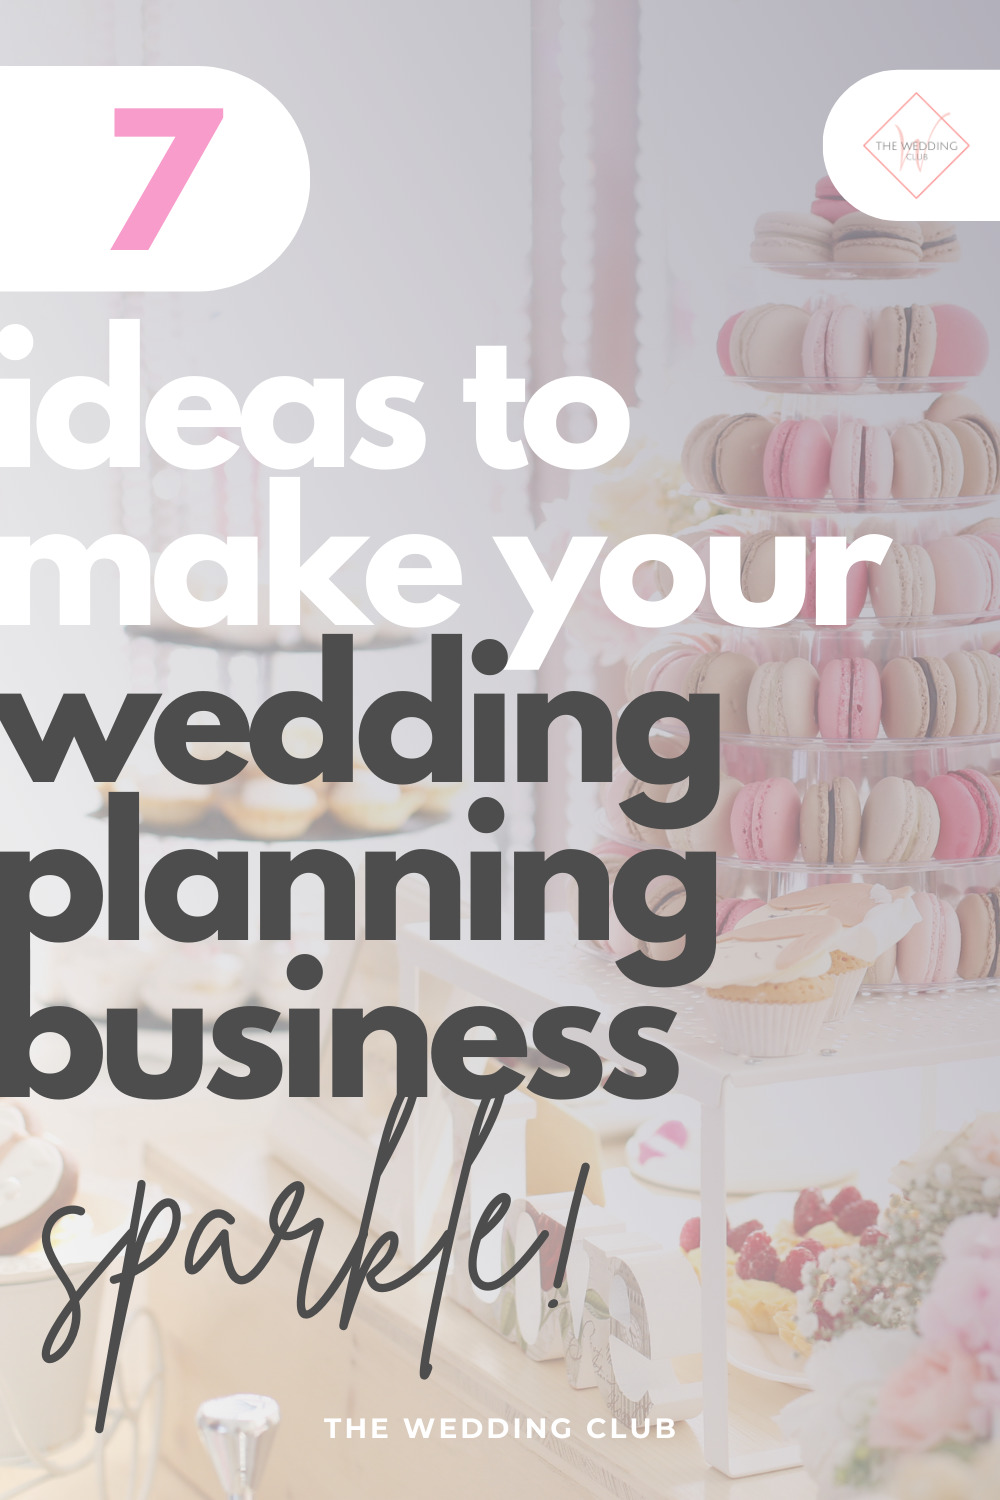 7 Ideas to make your wedding planning business sparkle